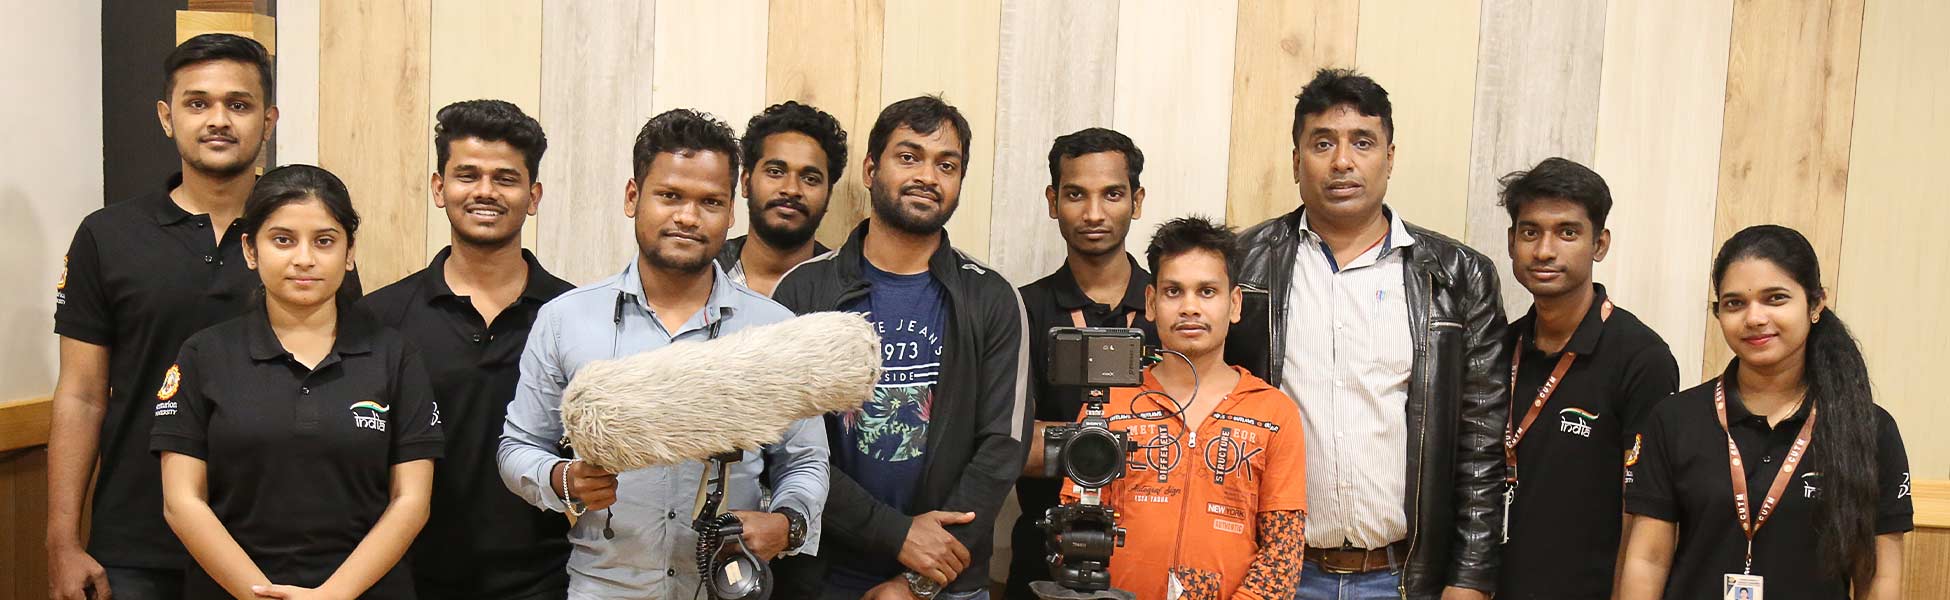 corporate film production services in india, corporate video production services in india, corporate production services in india